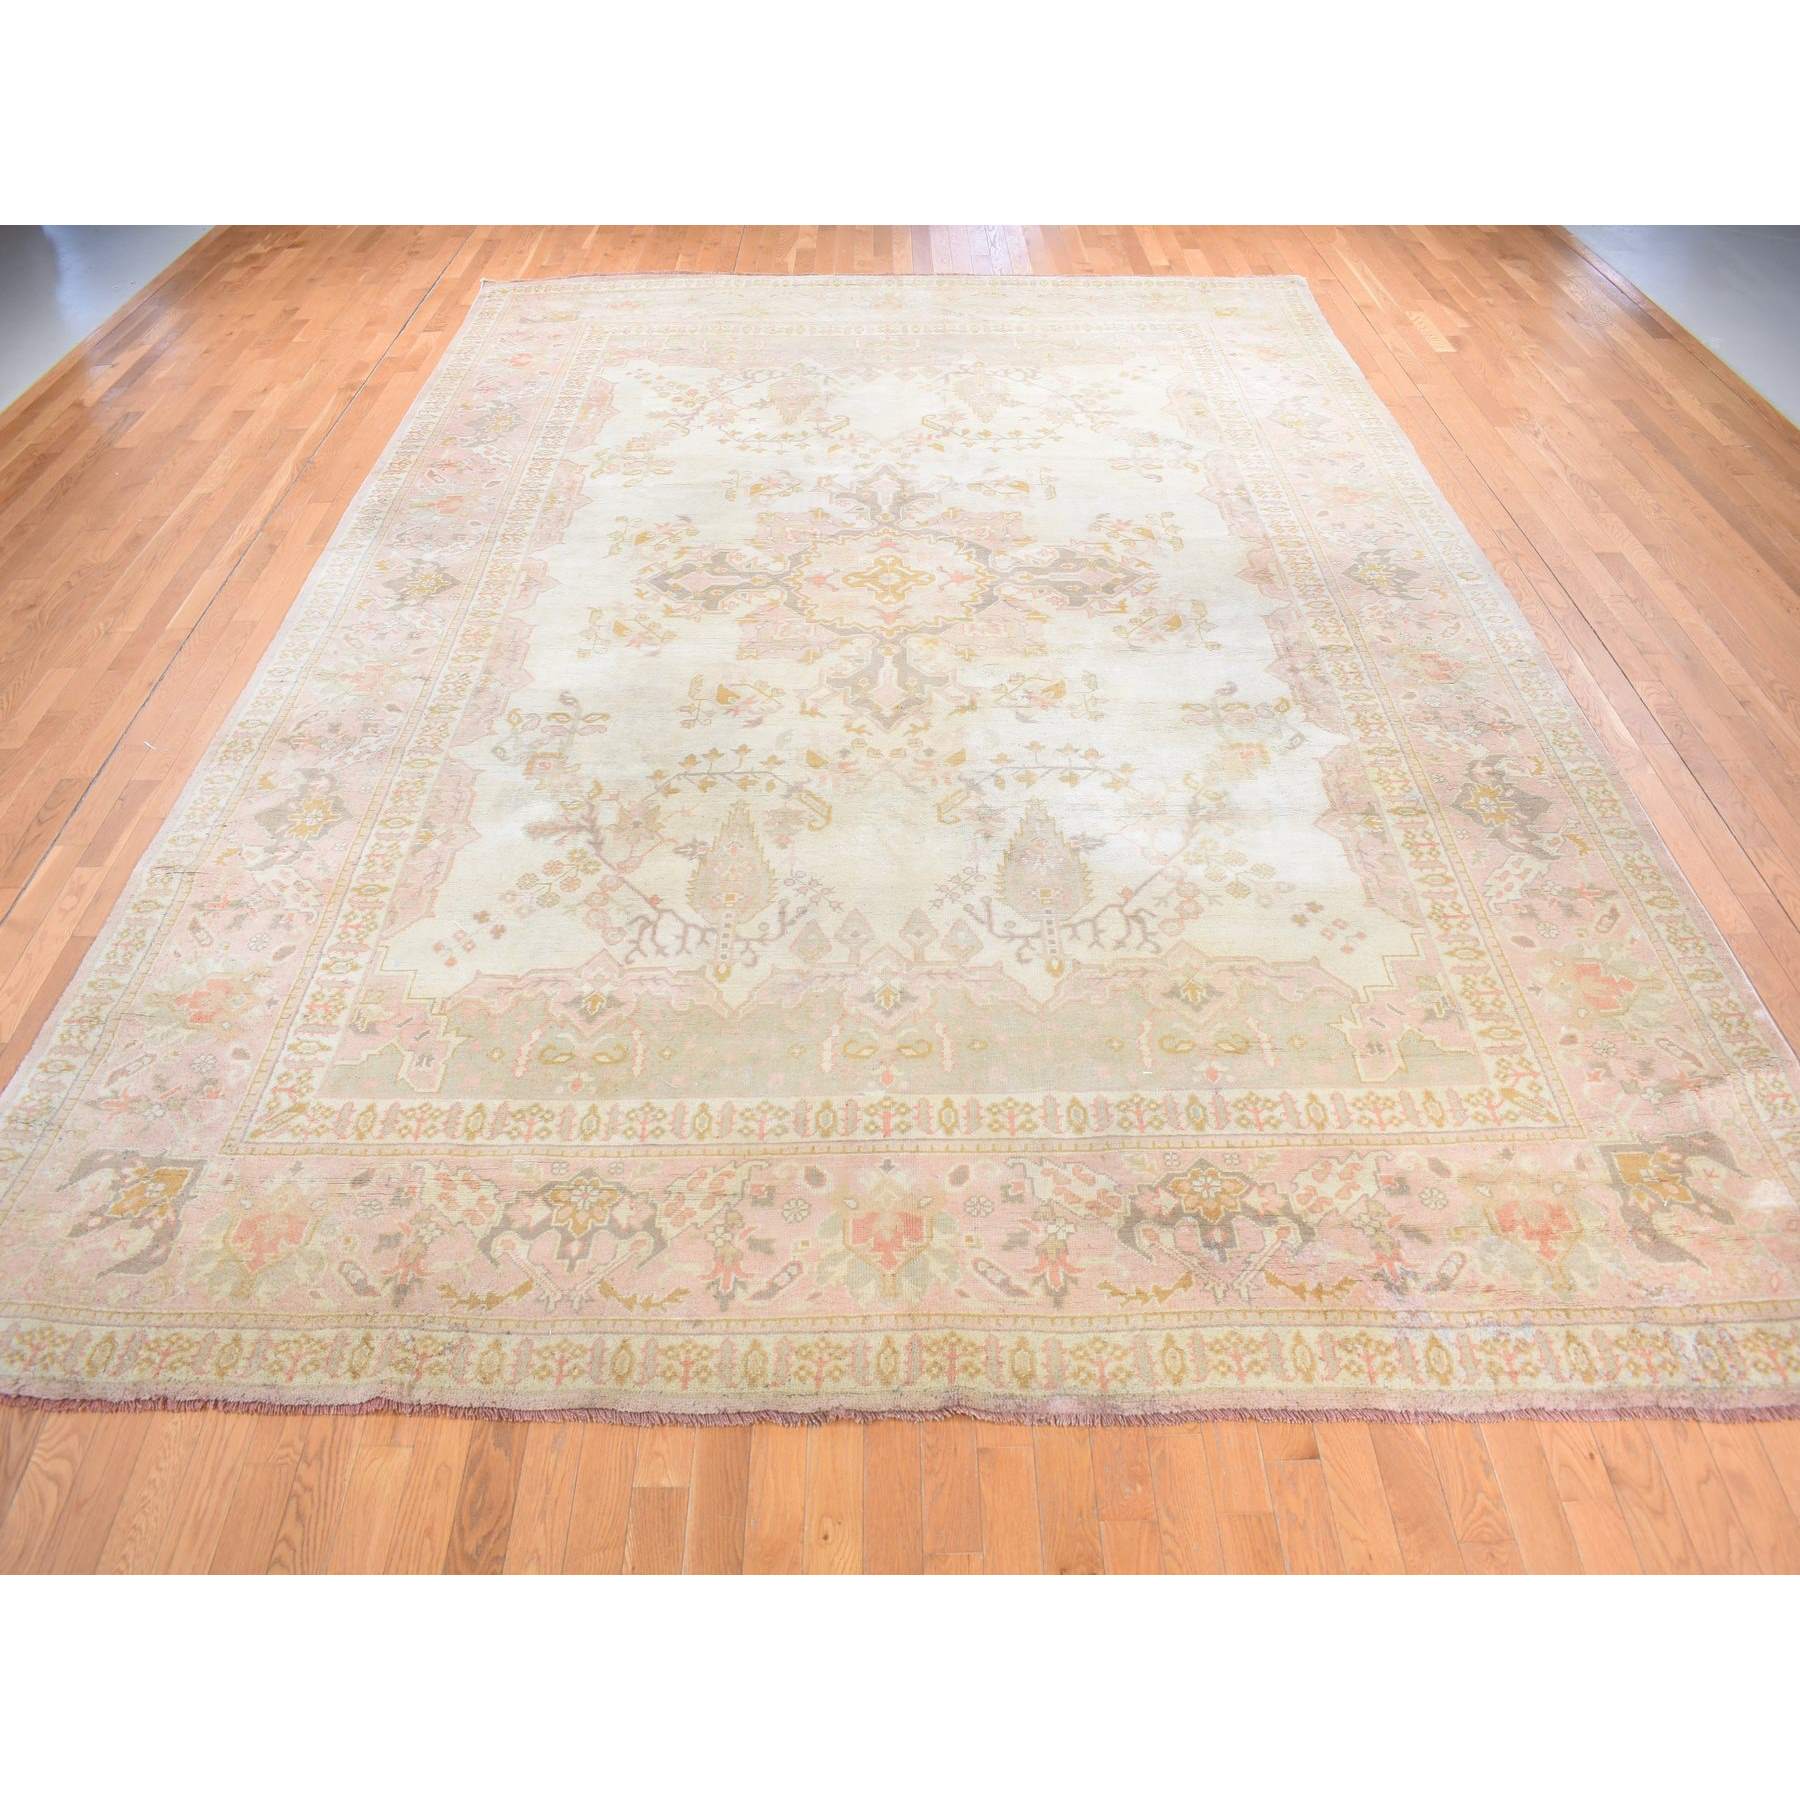 Antique-Hand-Knotted-Rug-403500